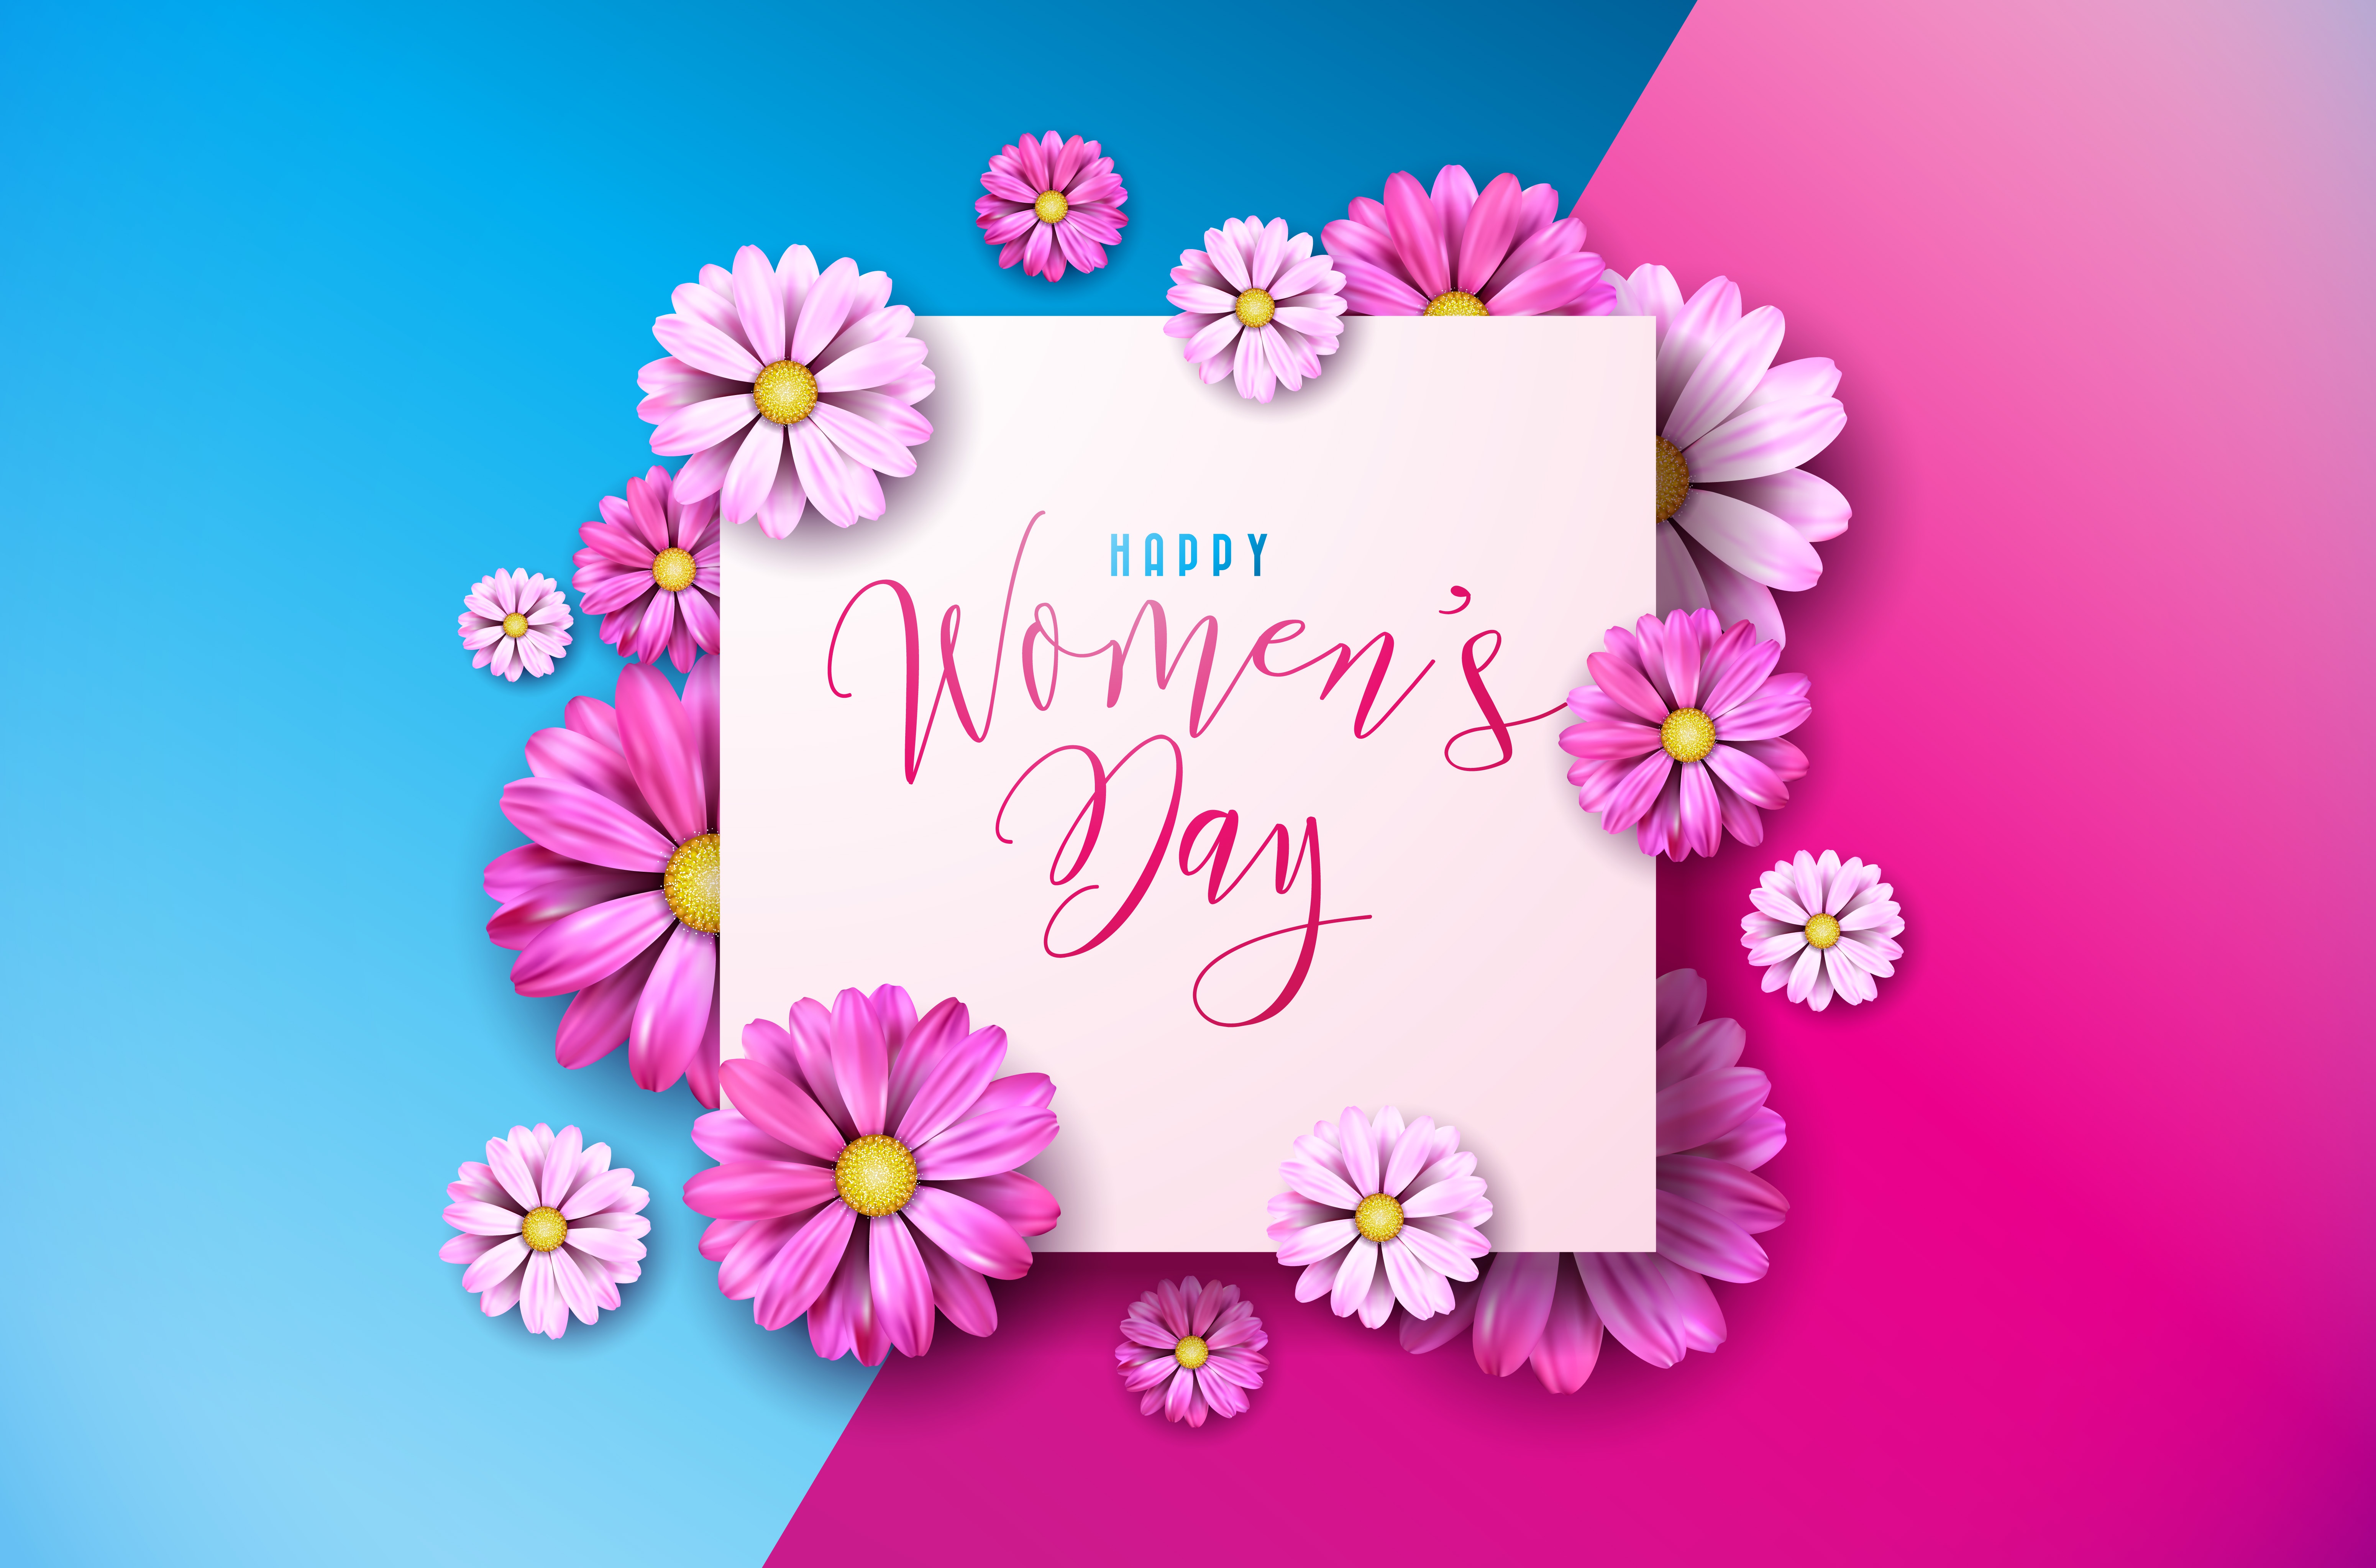 happy women's day, holiday, women's day, flower